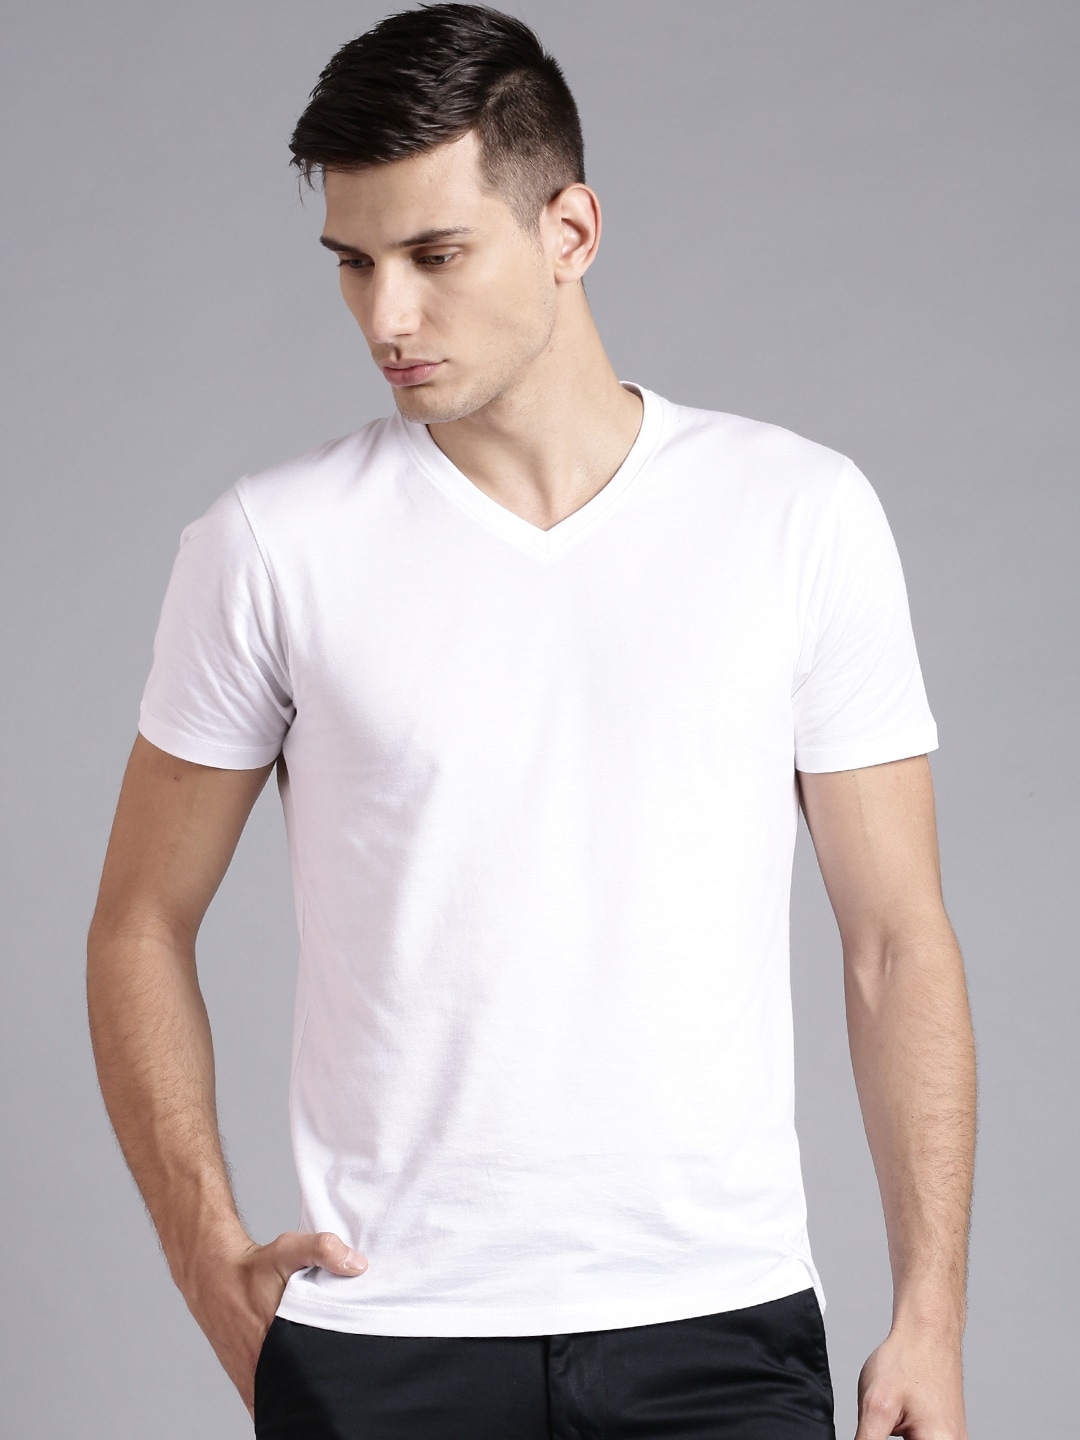 Buy ETHER White Pure Cotton T Shirt - Tshirts for Men 1018619 | Myntra